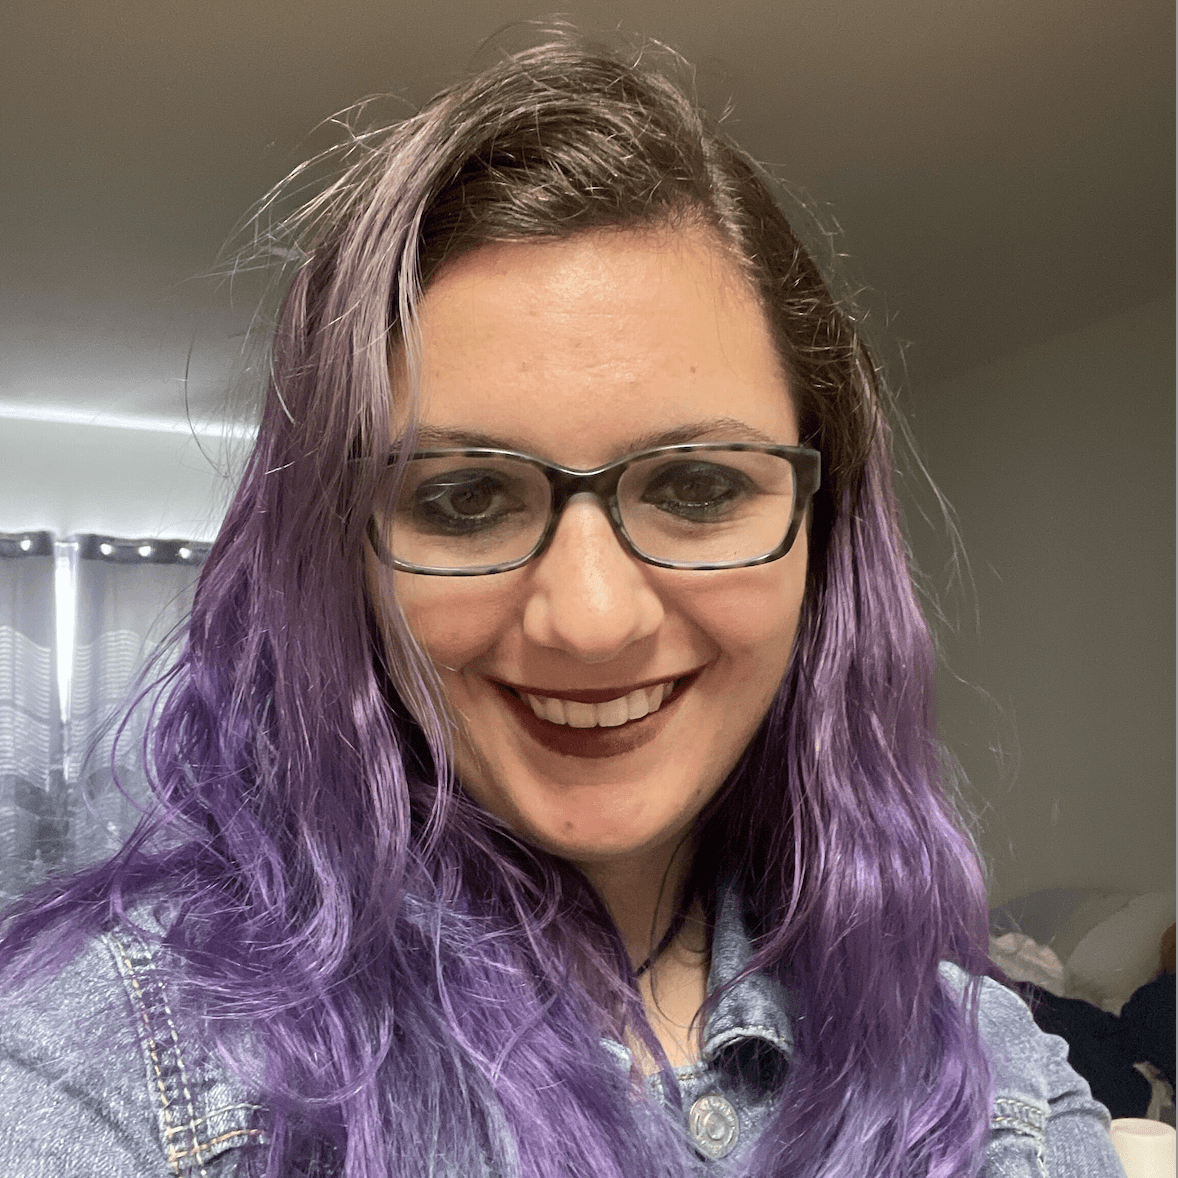 Elizabeth Minton, a smiling woman with purple hair and glasses, wearing a denim jacket, is indoors with soft lighting and a blurred background.